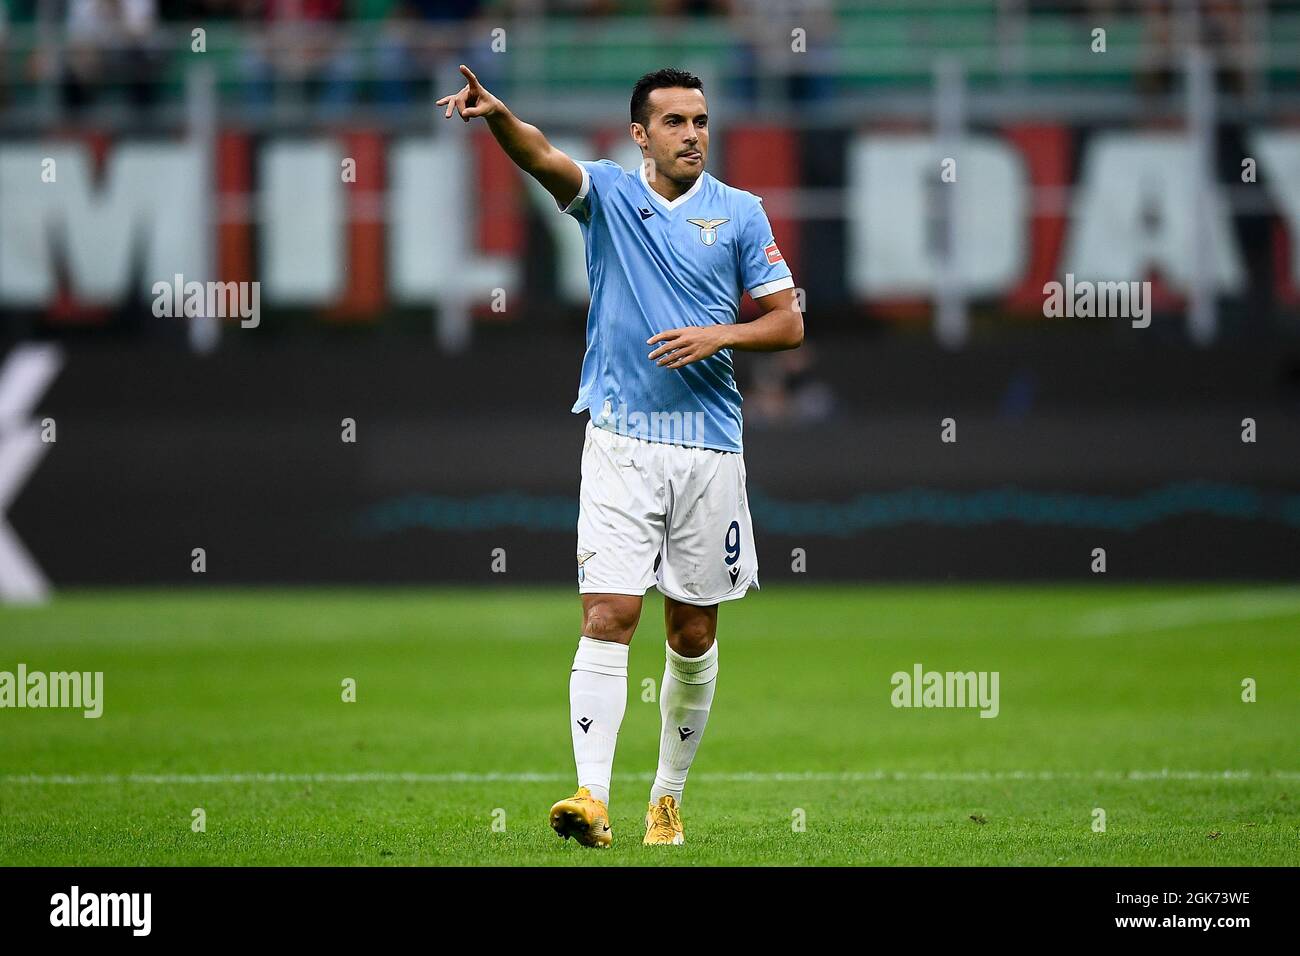 Milan, Italy. 12 September 2021. Pedro Eliezer Rodriguez Ledesma of SS Lazio gestures during the Serie A football match between AC Milan and SS Lazio. Credit: Nicolò Campo/Alamy Live News Stock Photo